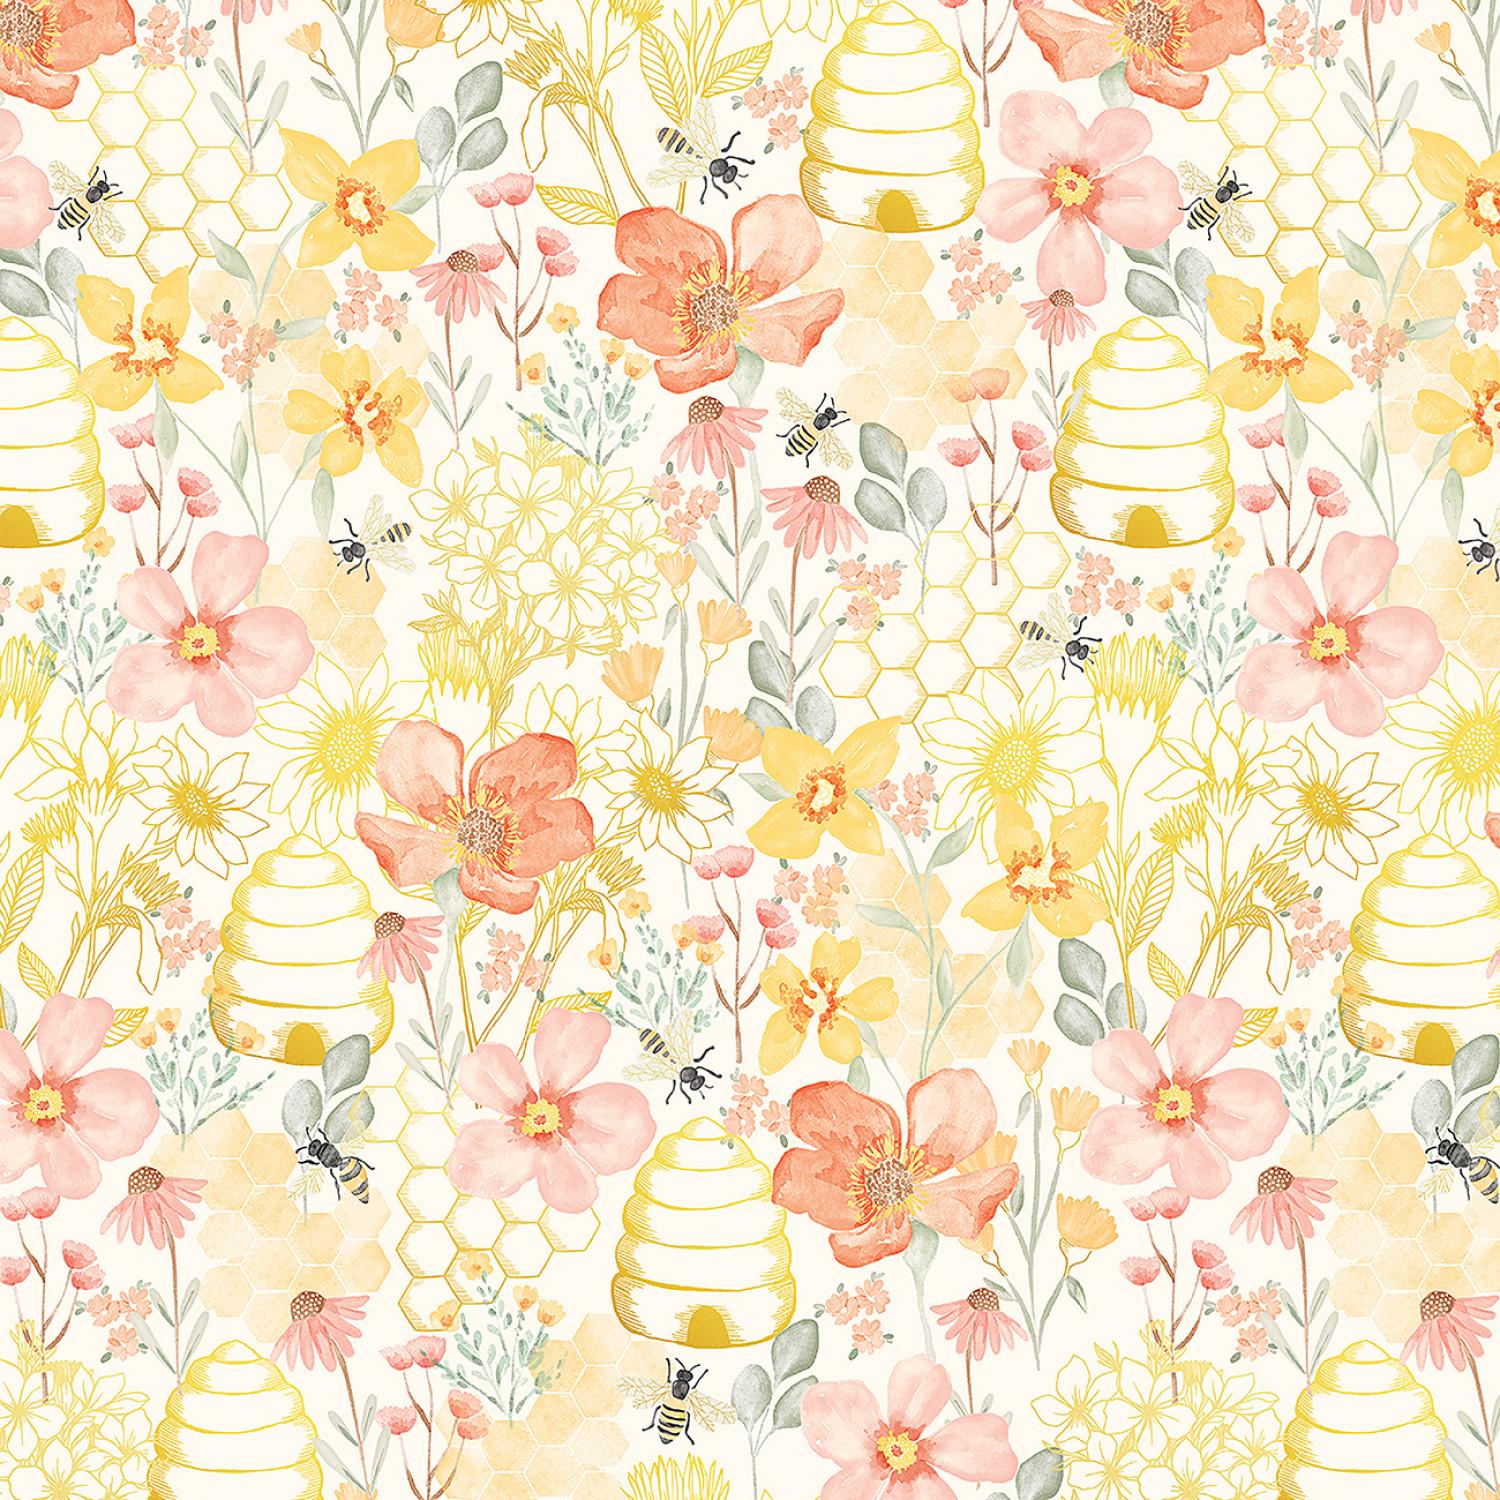 Home Sweet Home  - Large  Beehive Garden Floral - CD3041-CREAM